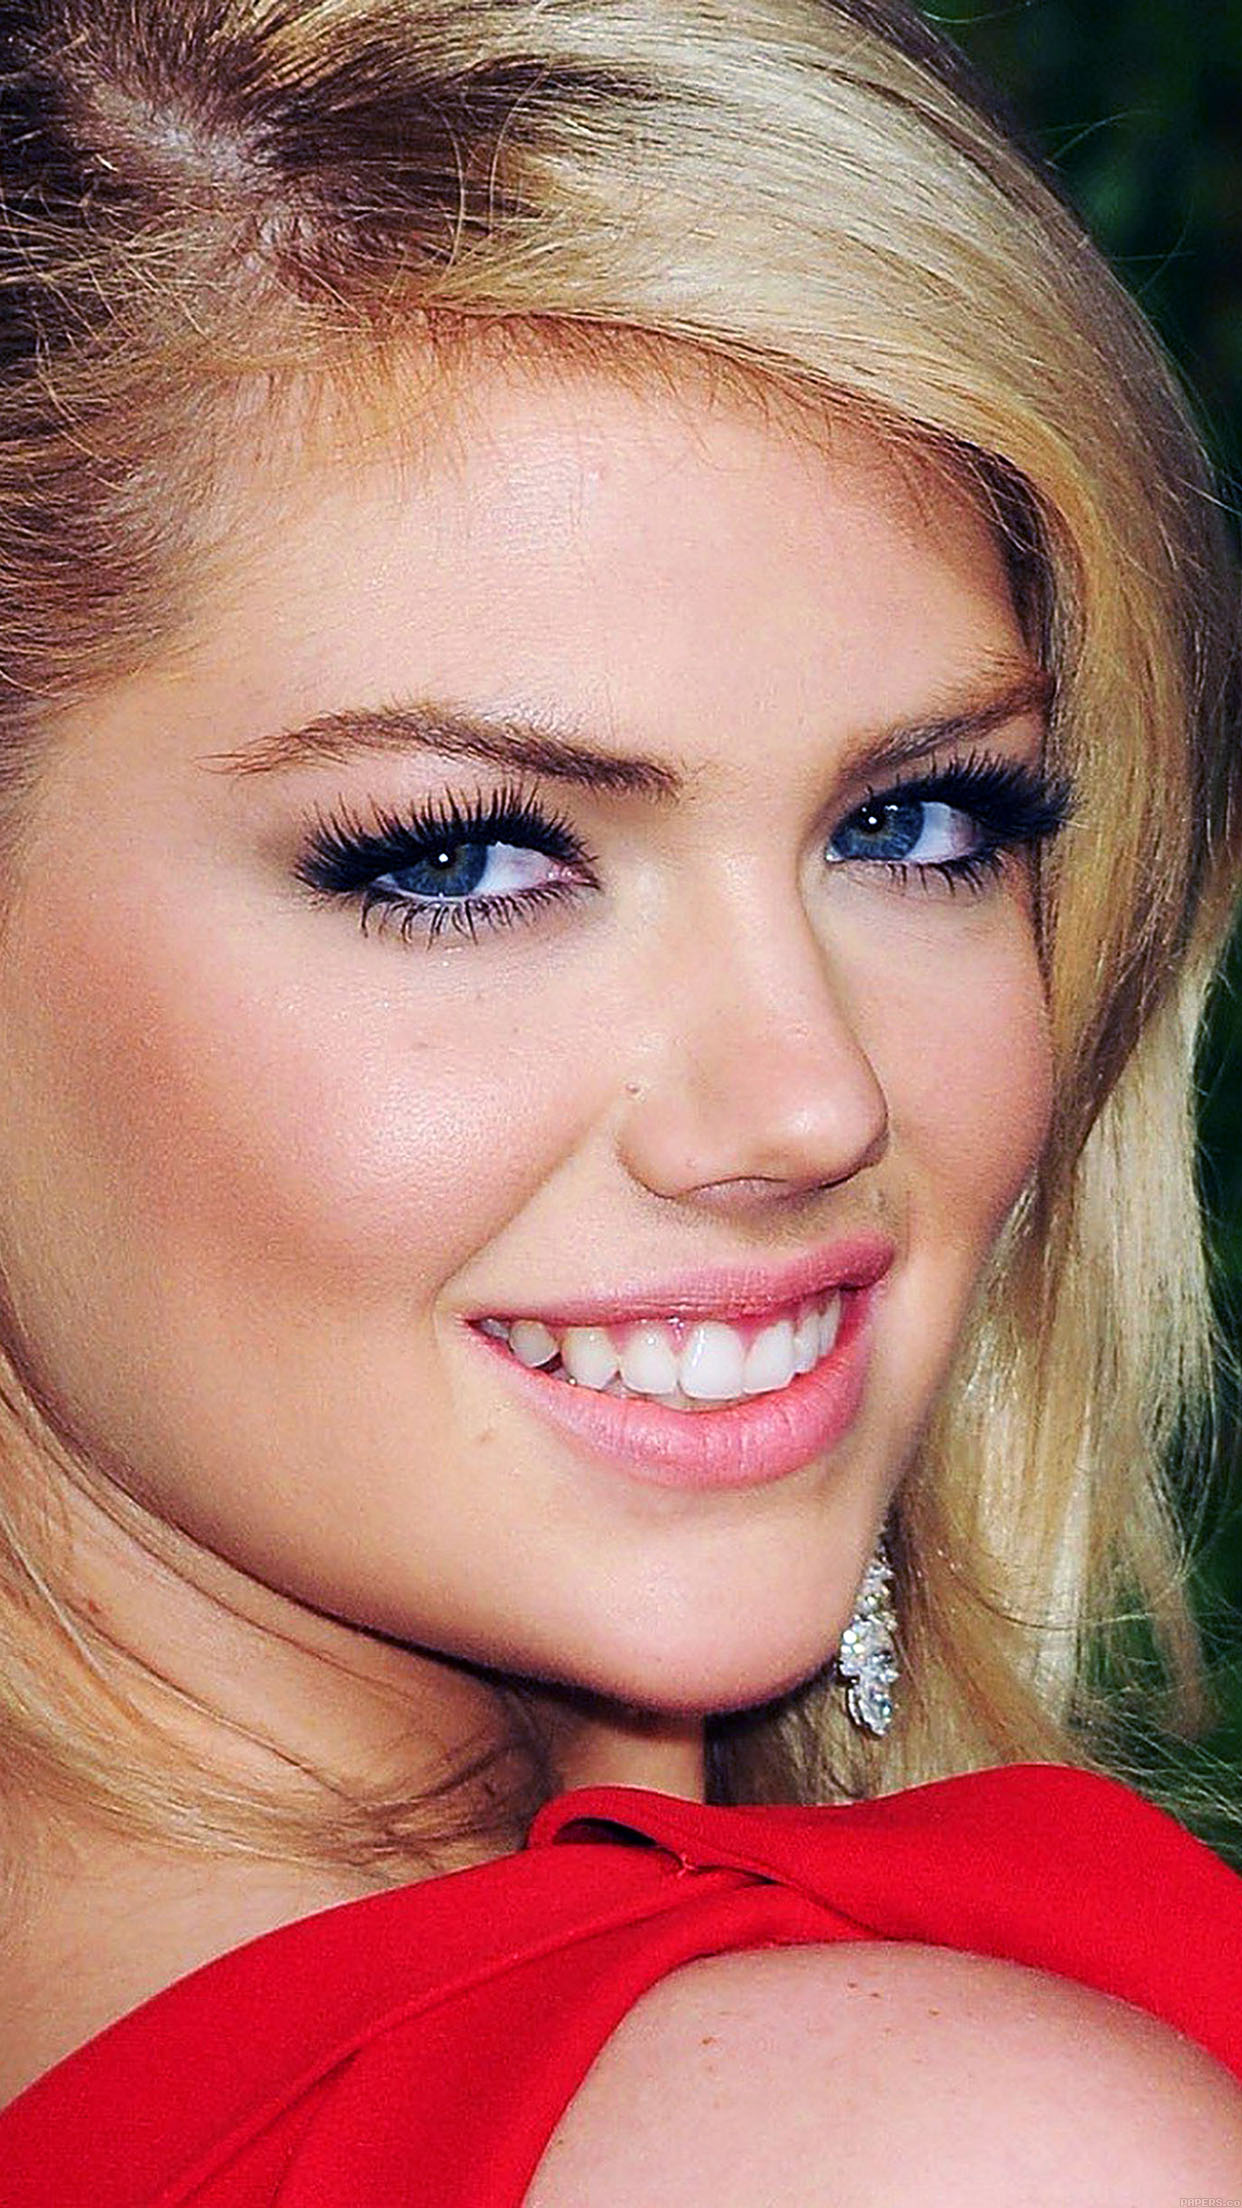 Kate Upton Red Dress Girl Face Android wallpaper